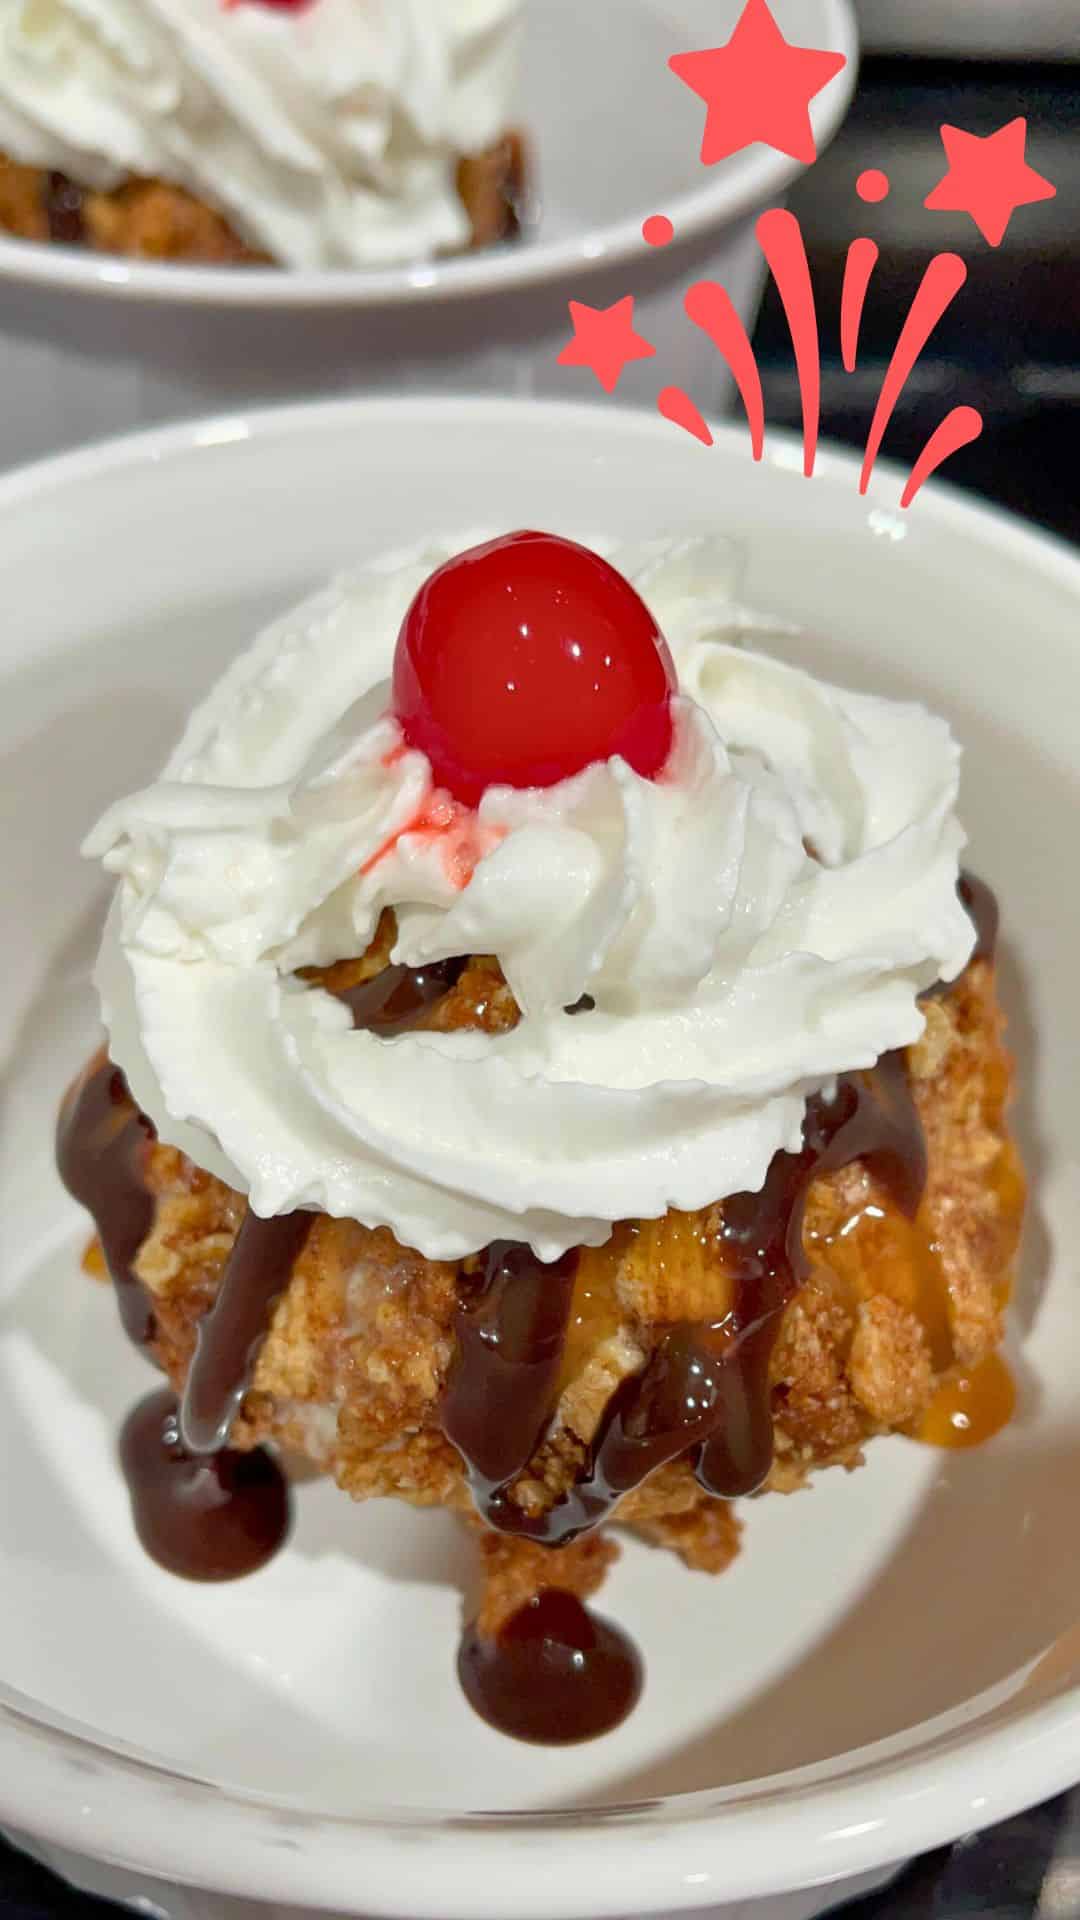 A vibrant cherry topping an Air-Fried Mexican Fried Ice Cream ball surrounded by whipped cream and caramel sauce